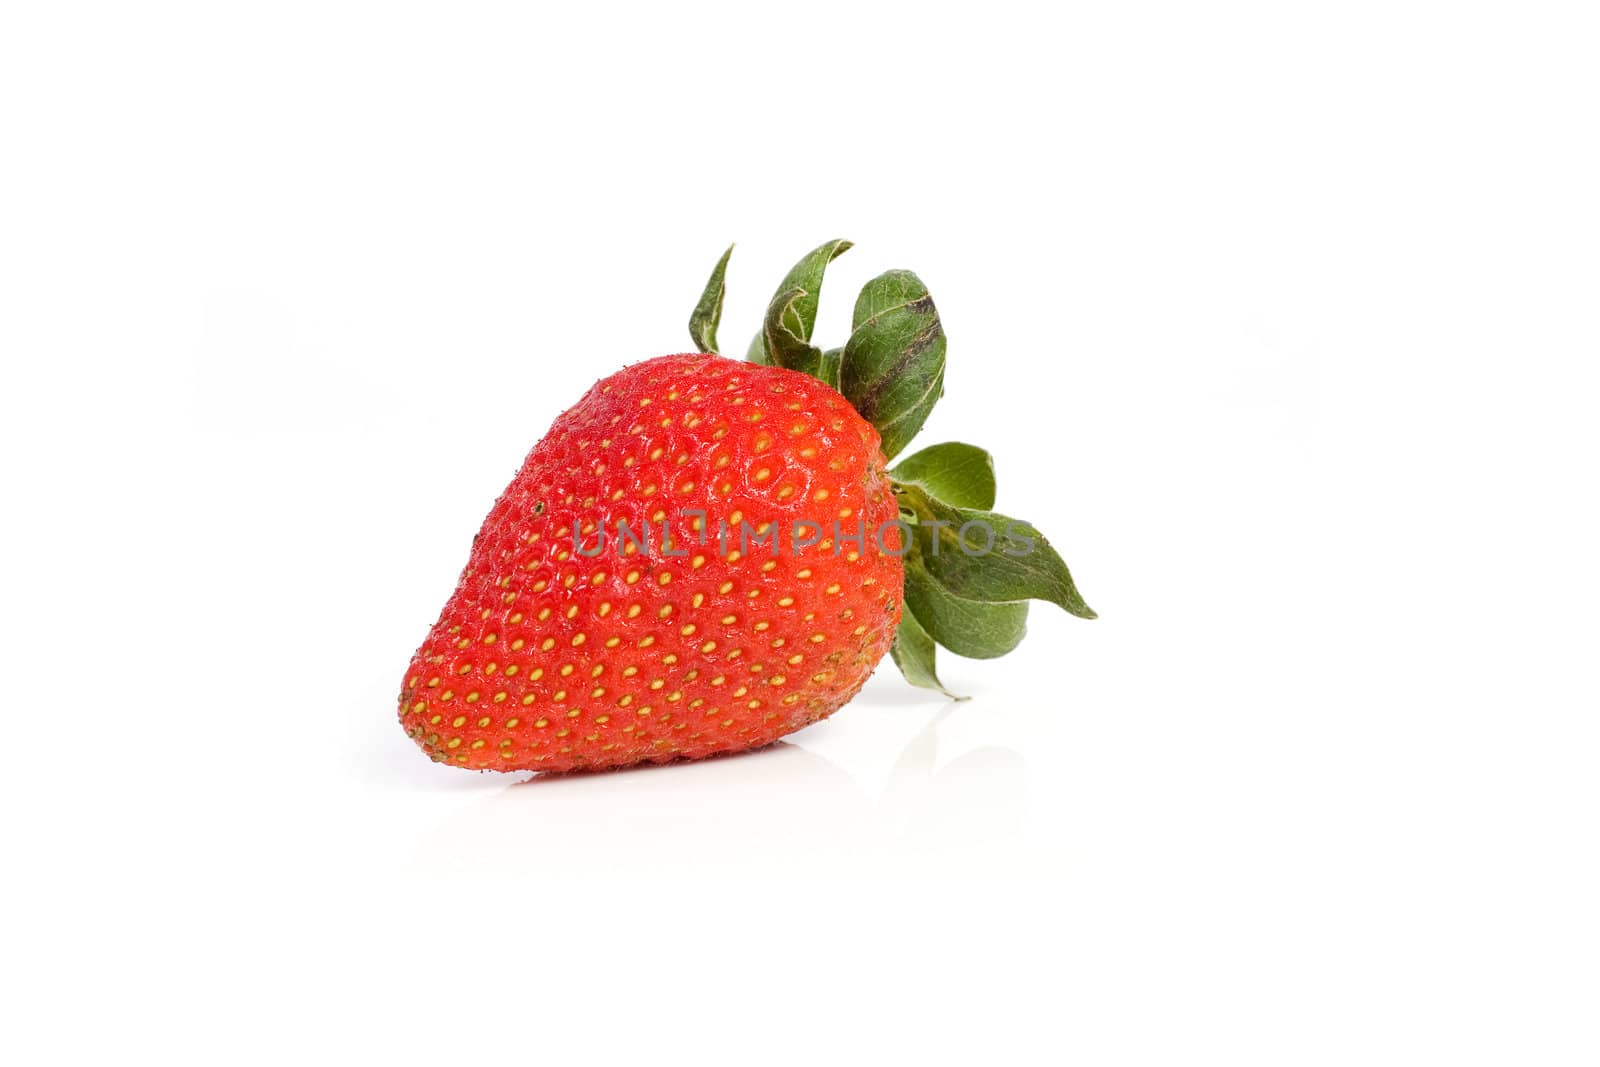 Fresh strawberries by posterize